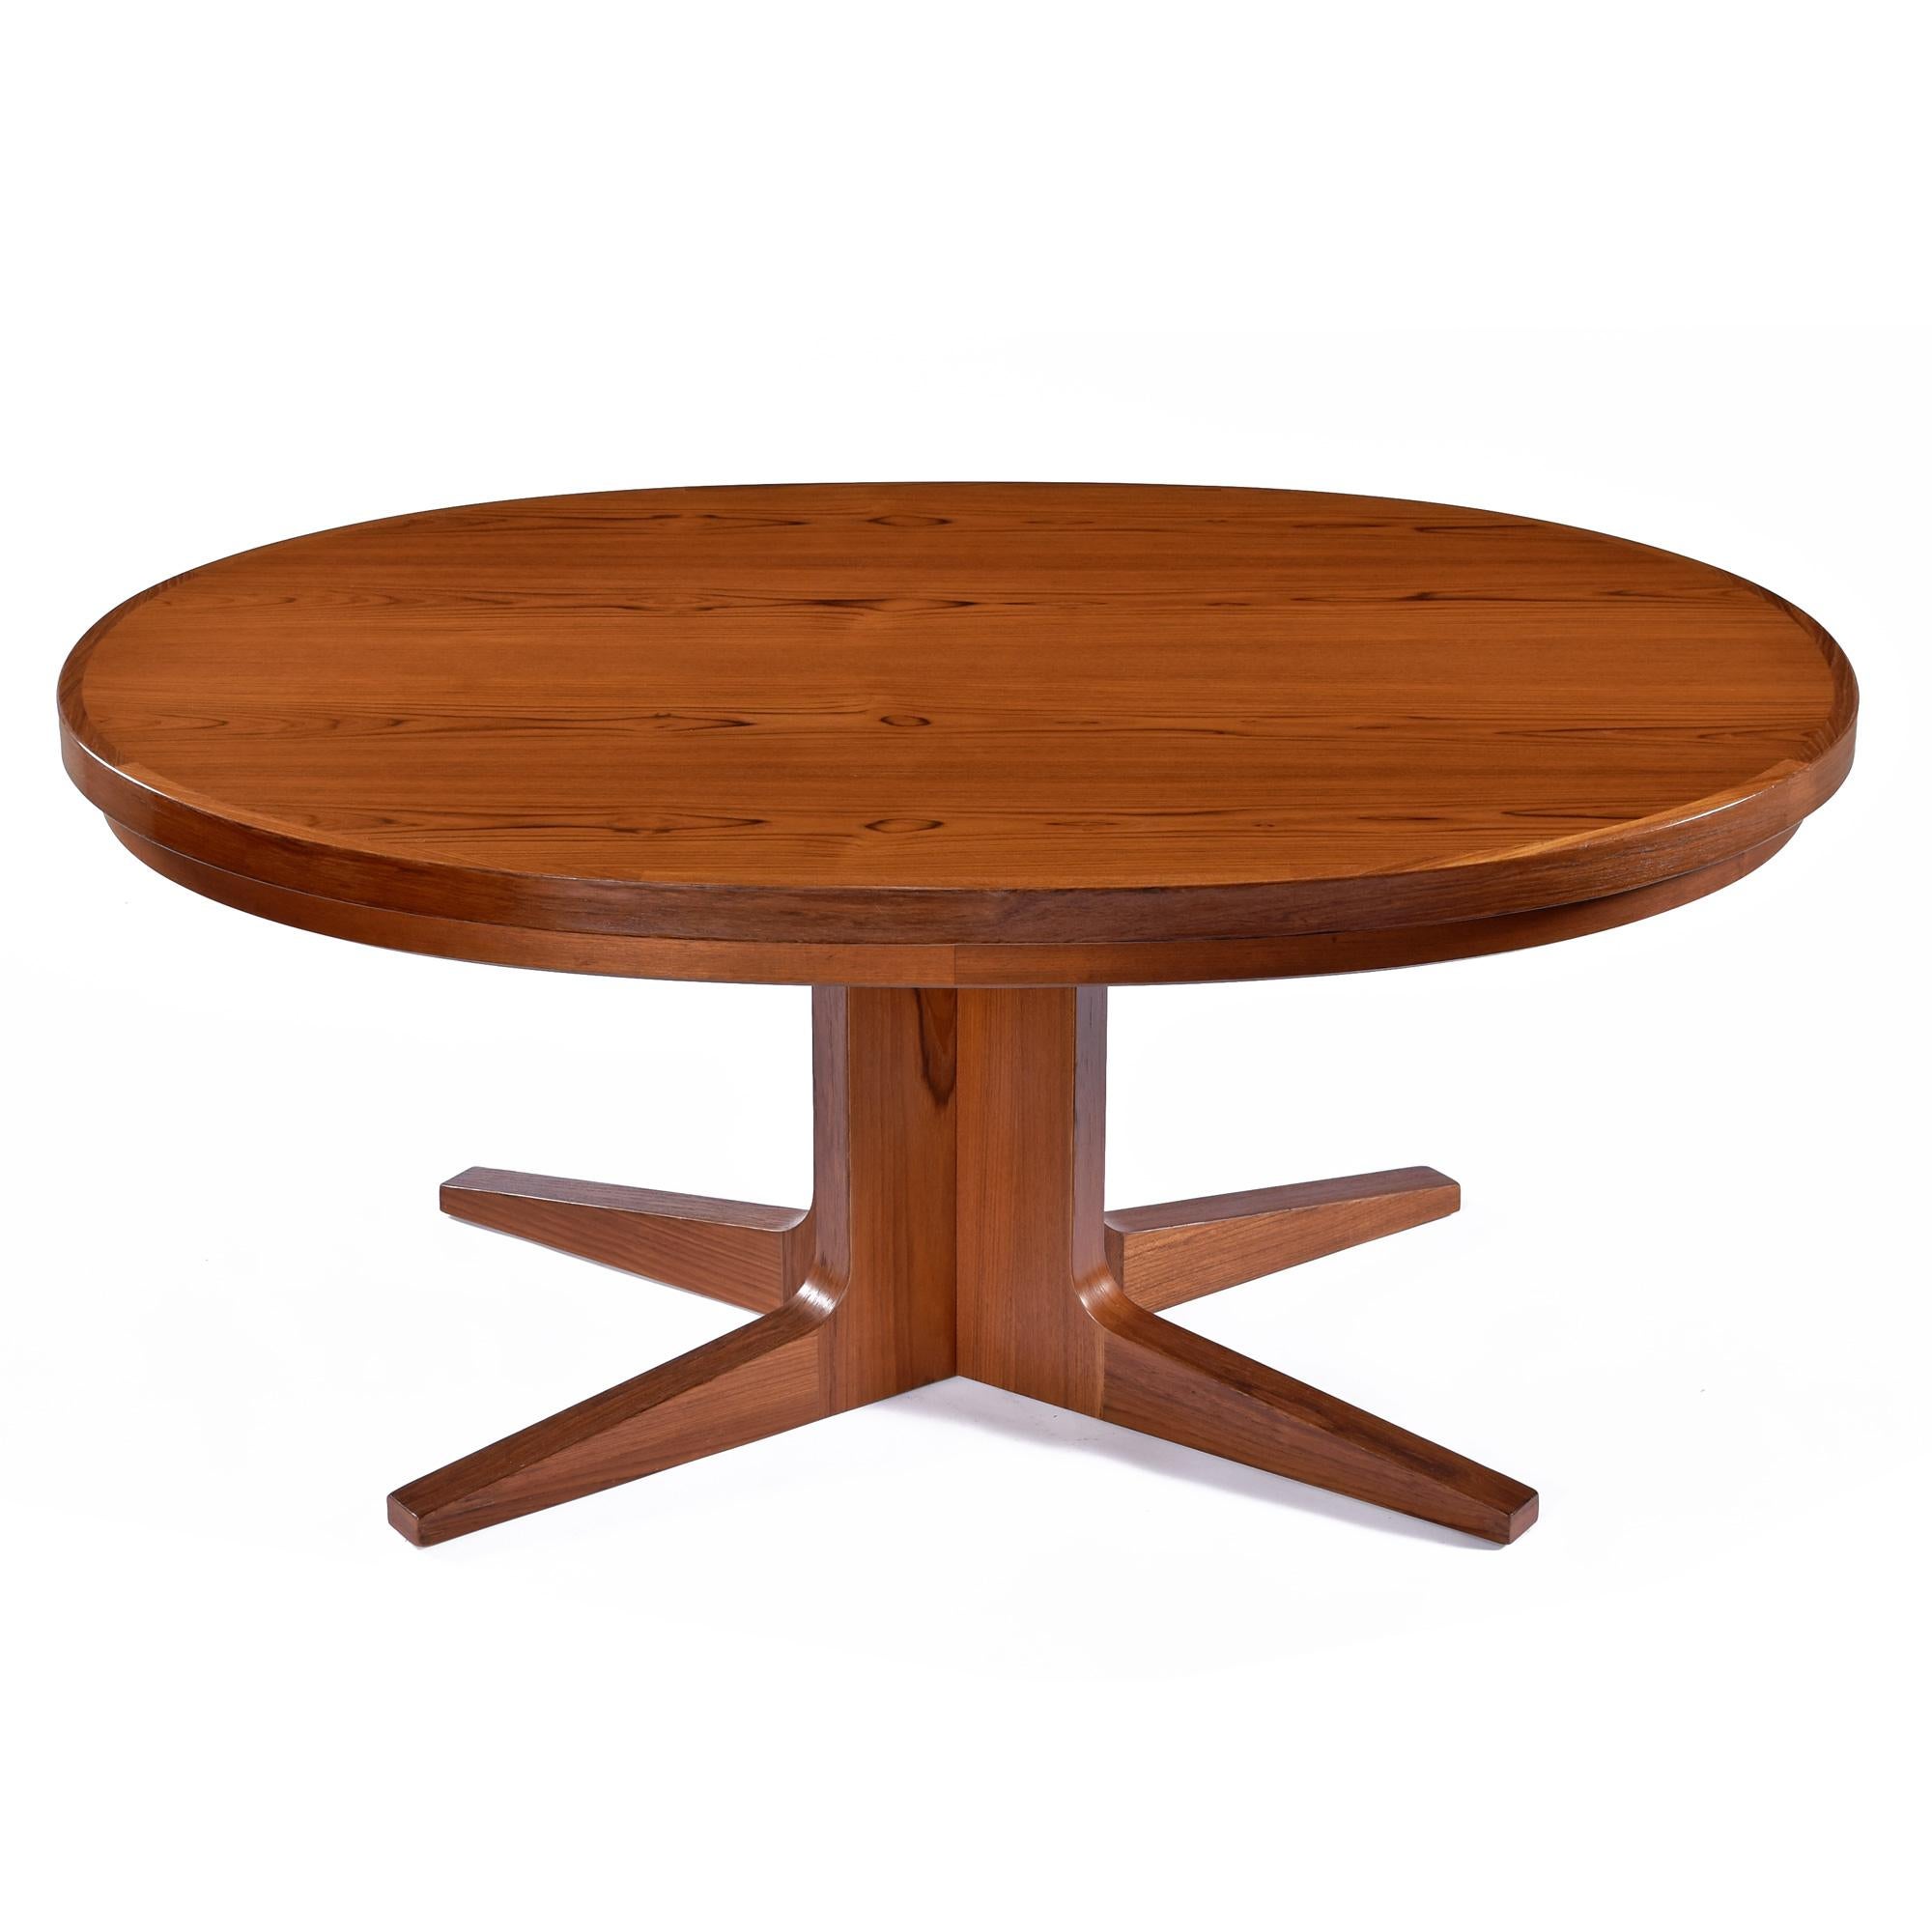 Late 20th Century Danish Teak Flip-Flap Oval Lotus Expanding Dining Table by Dyrlund For Sale